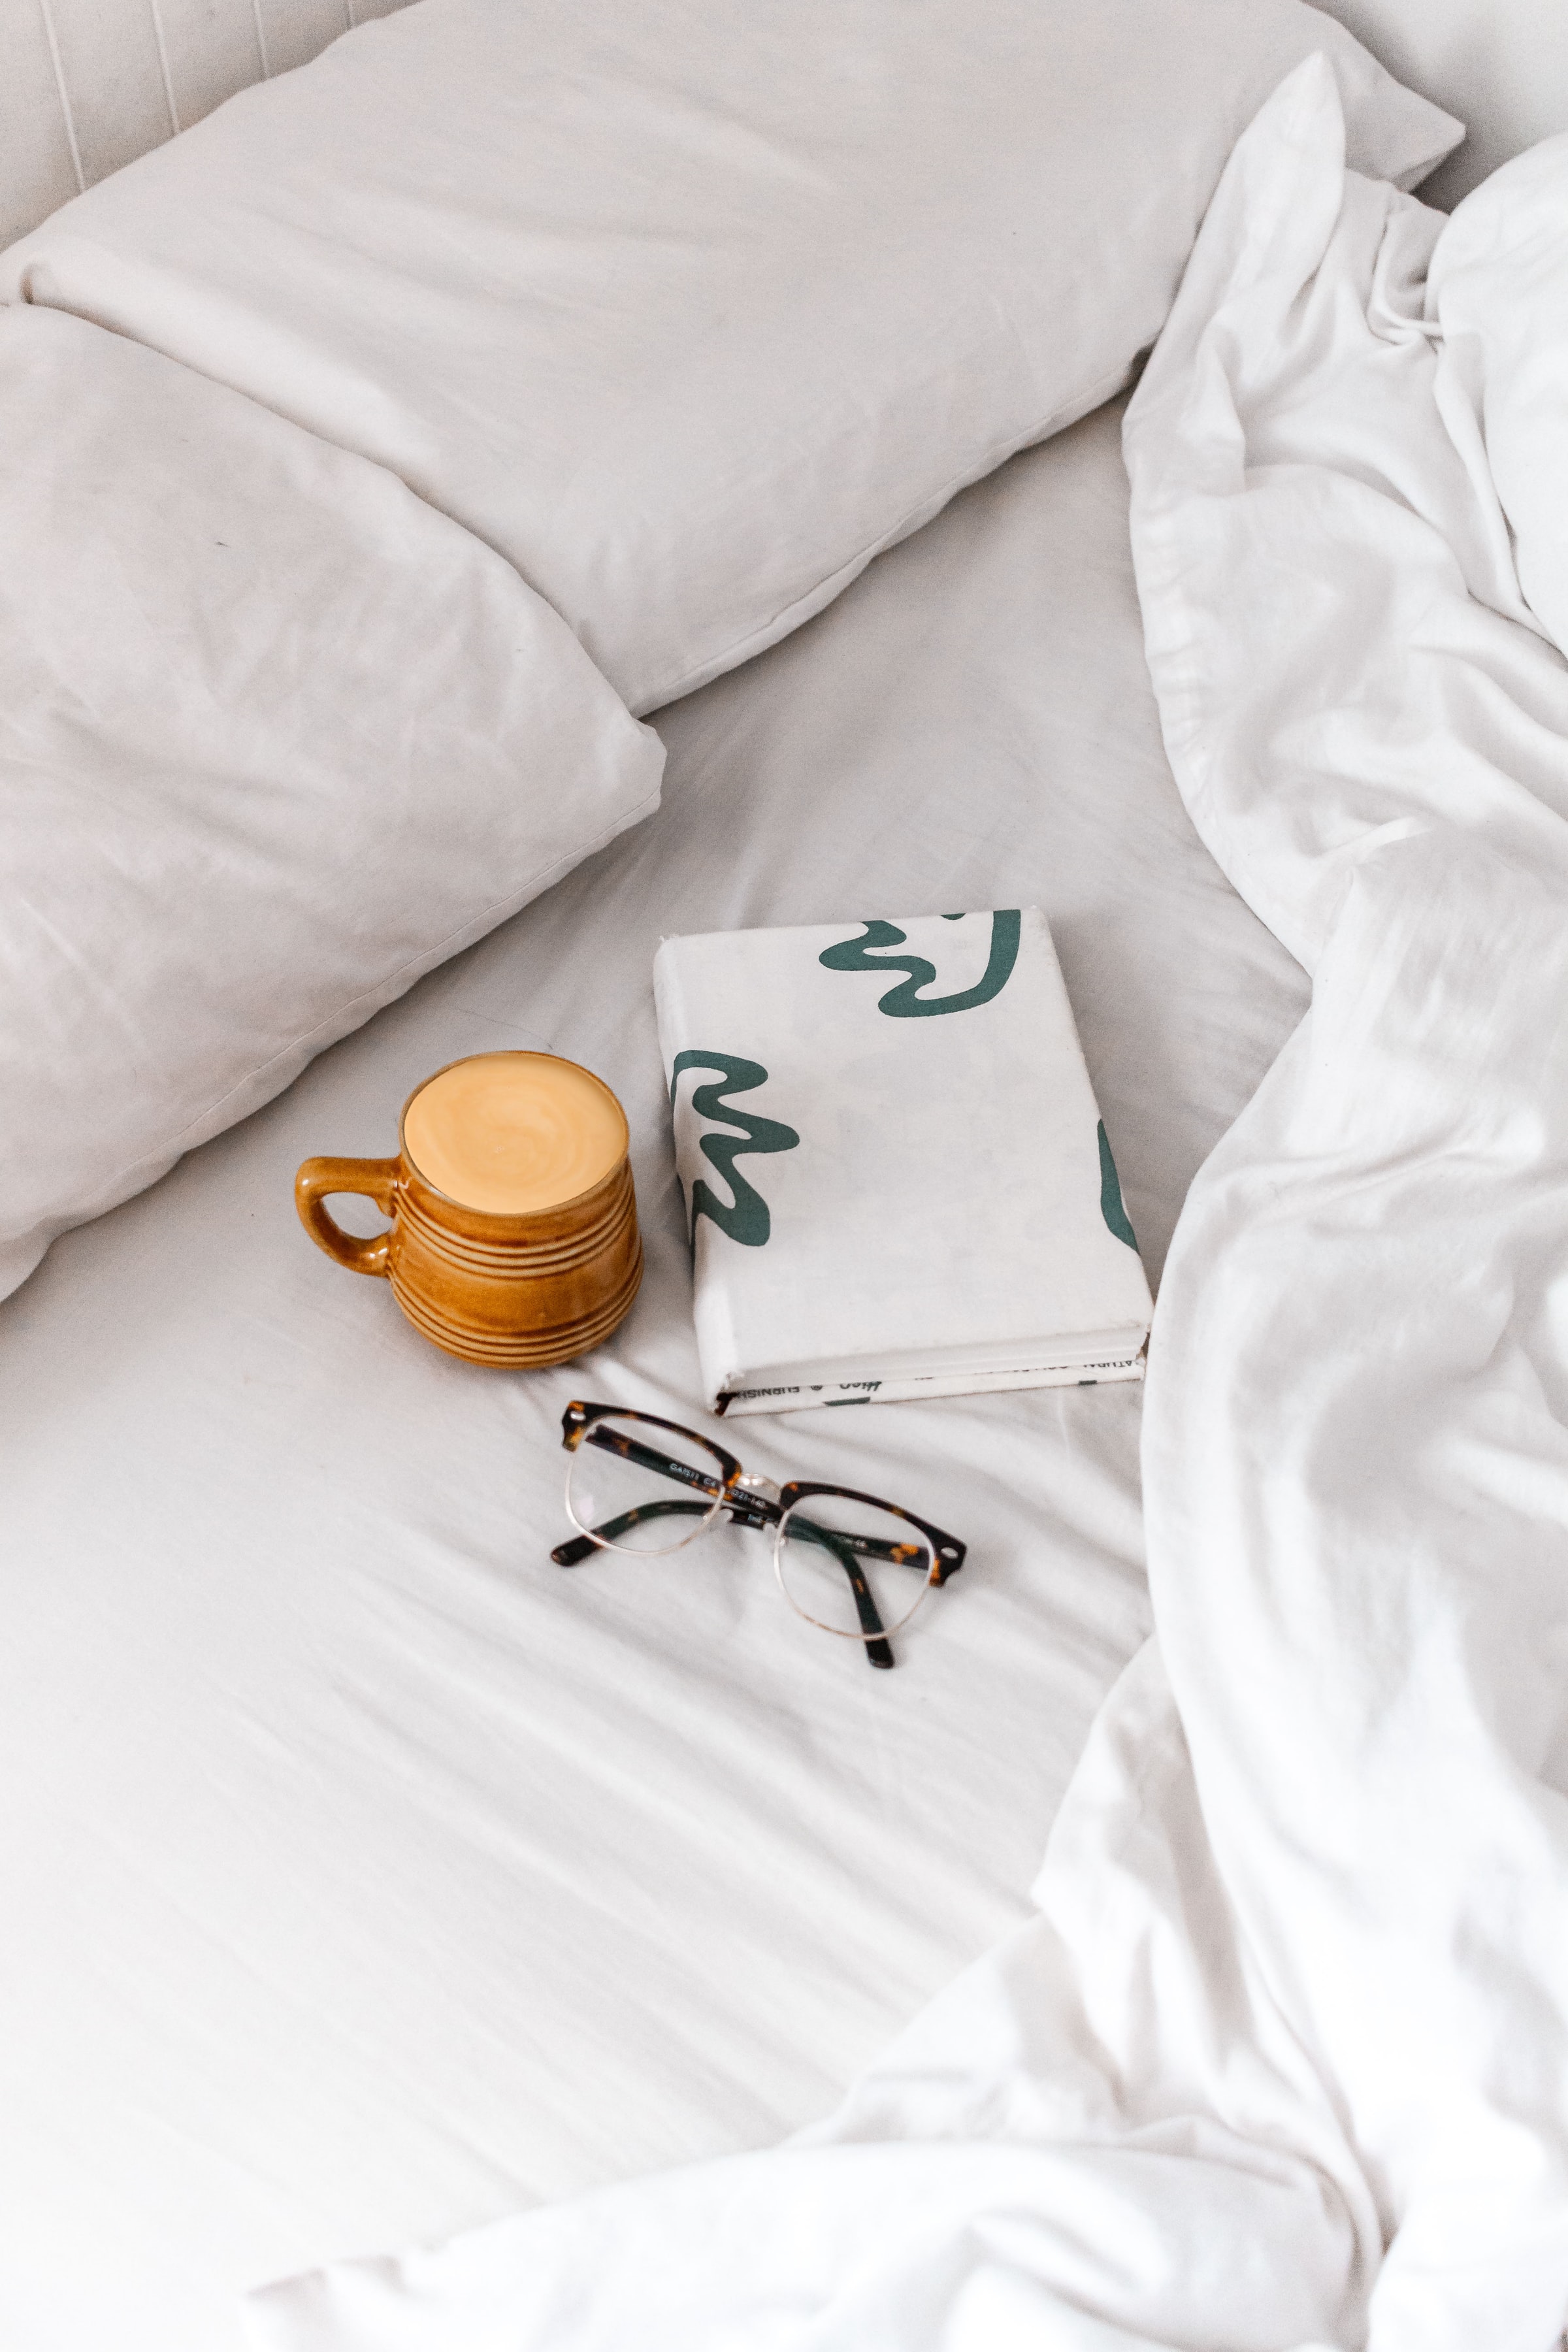 bed, coffee, miscellanea, miscellaneous, cup, book, glasses, spectacles Full HD